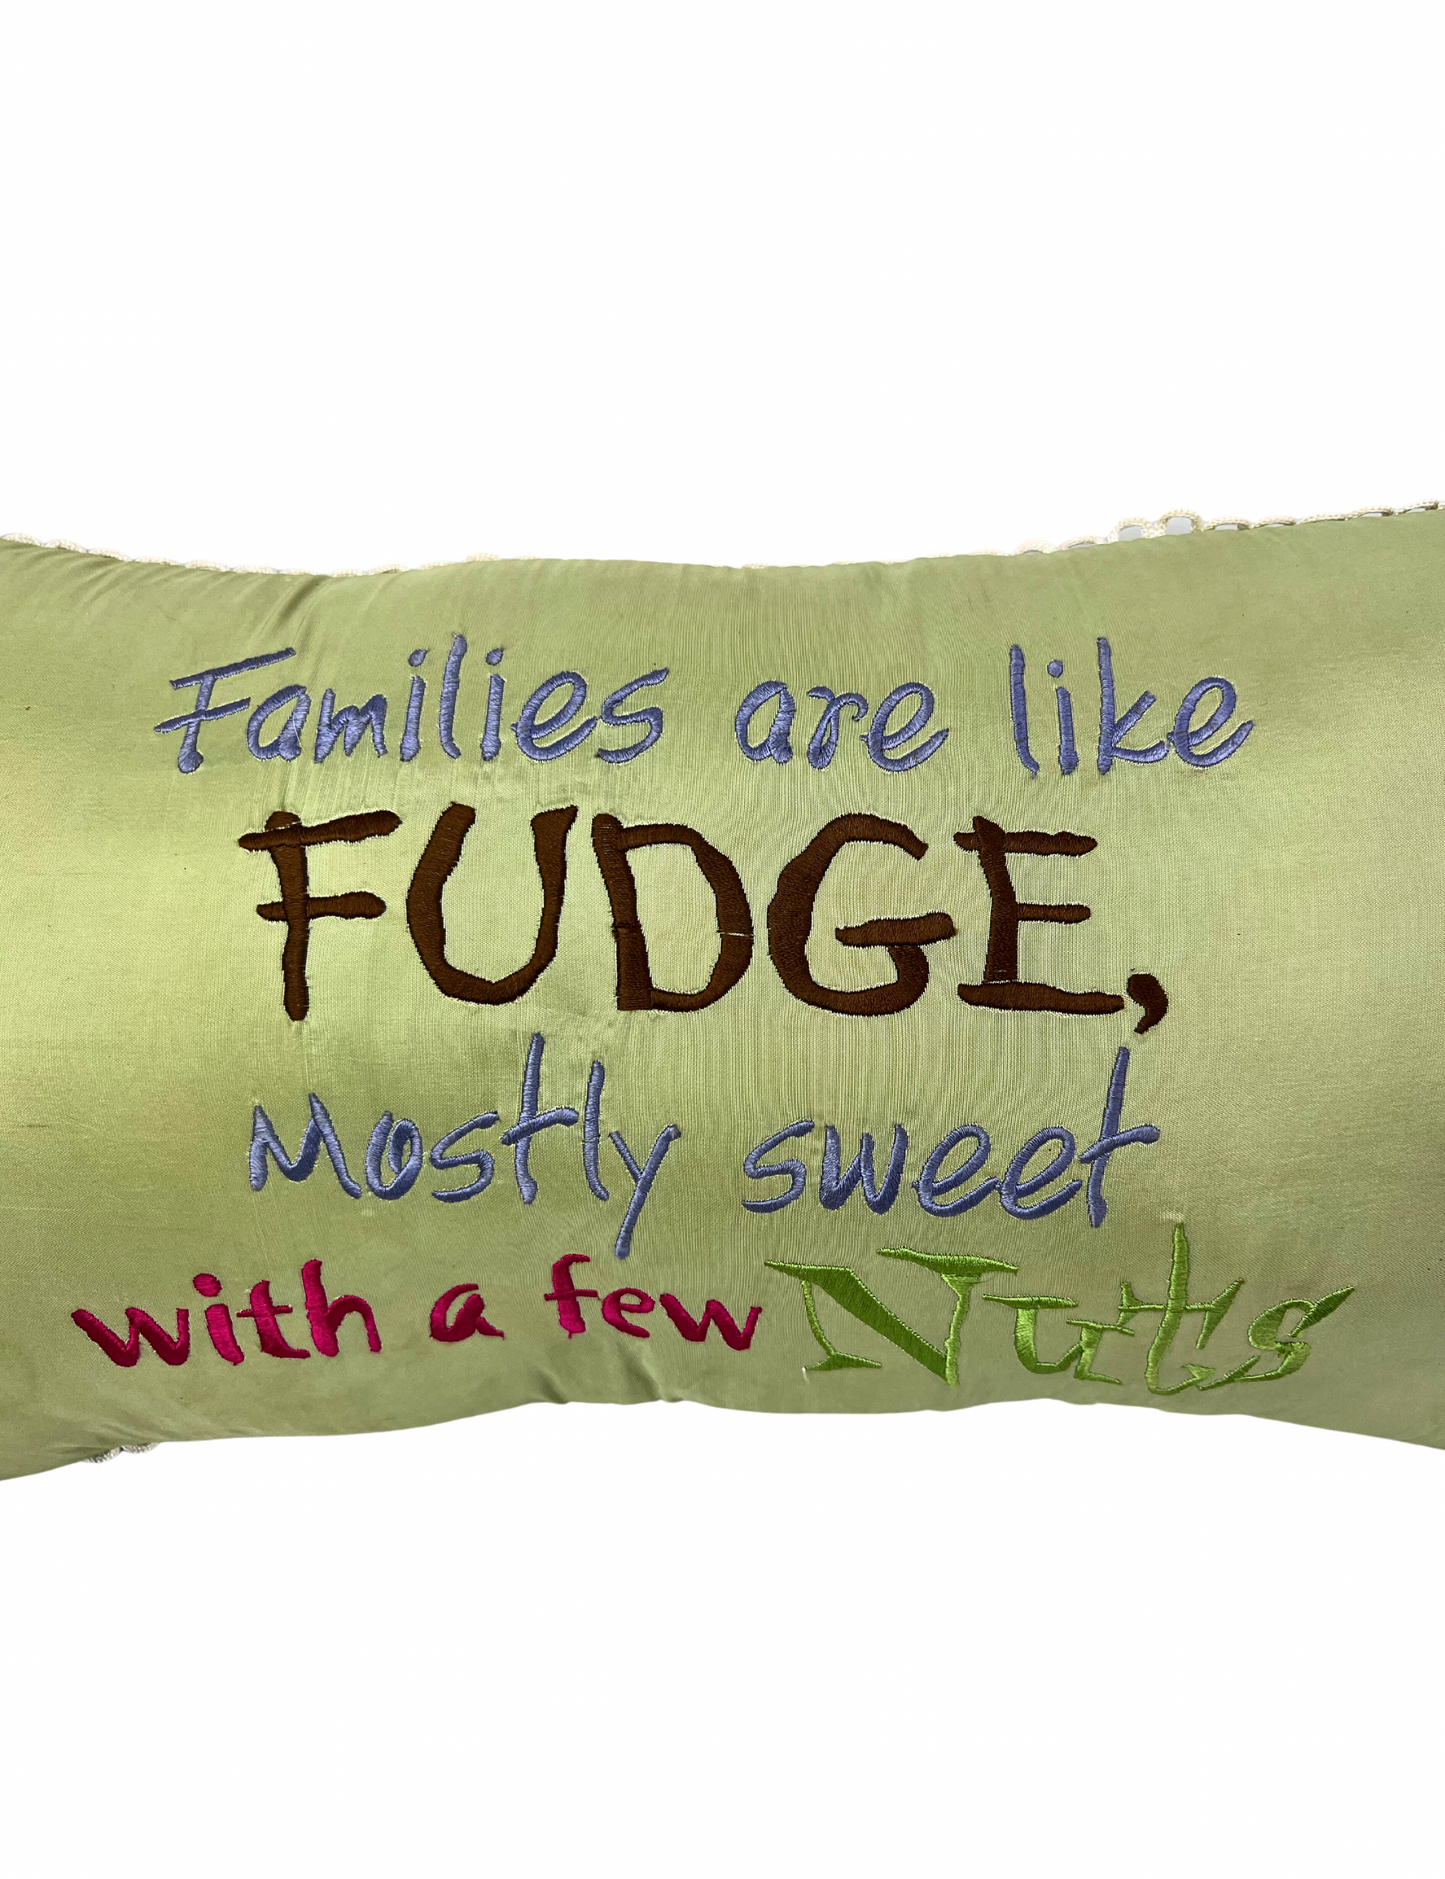 90’s Families Are Like Fudge, Mostly Sweet With a Few Nuts Throw Pillow 15” x 10”